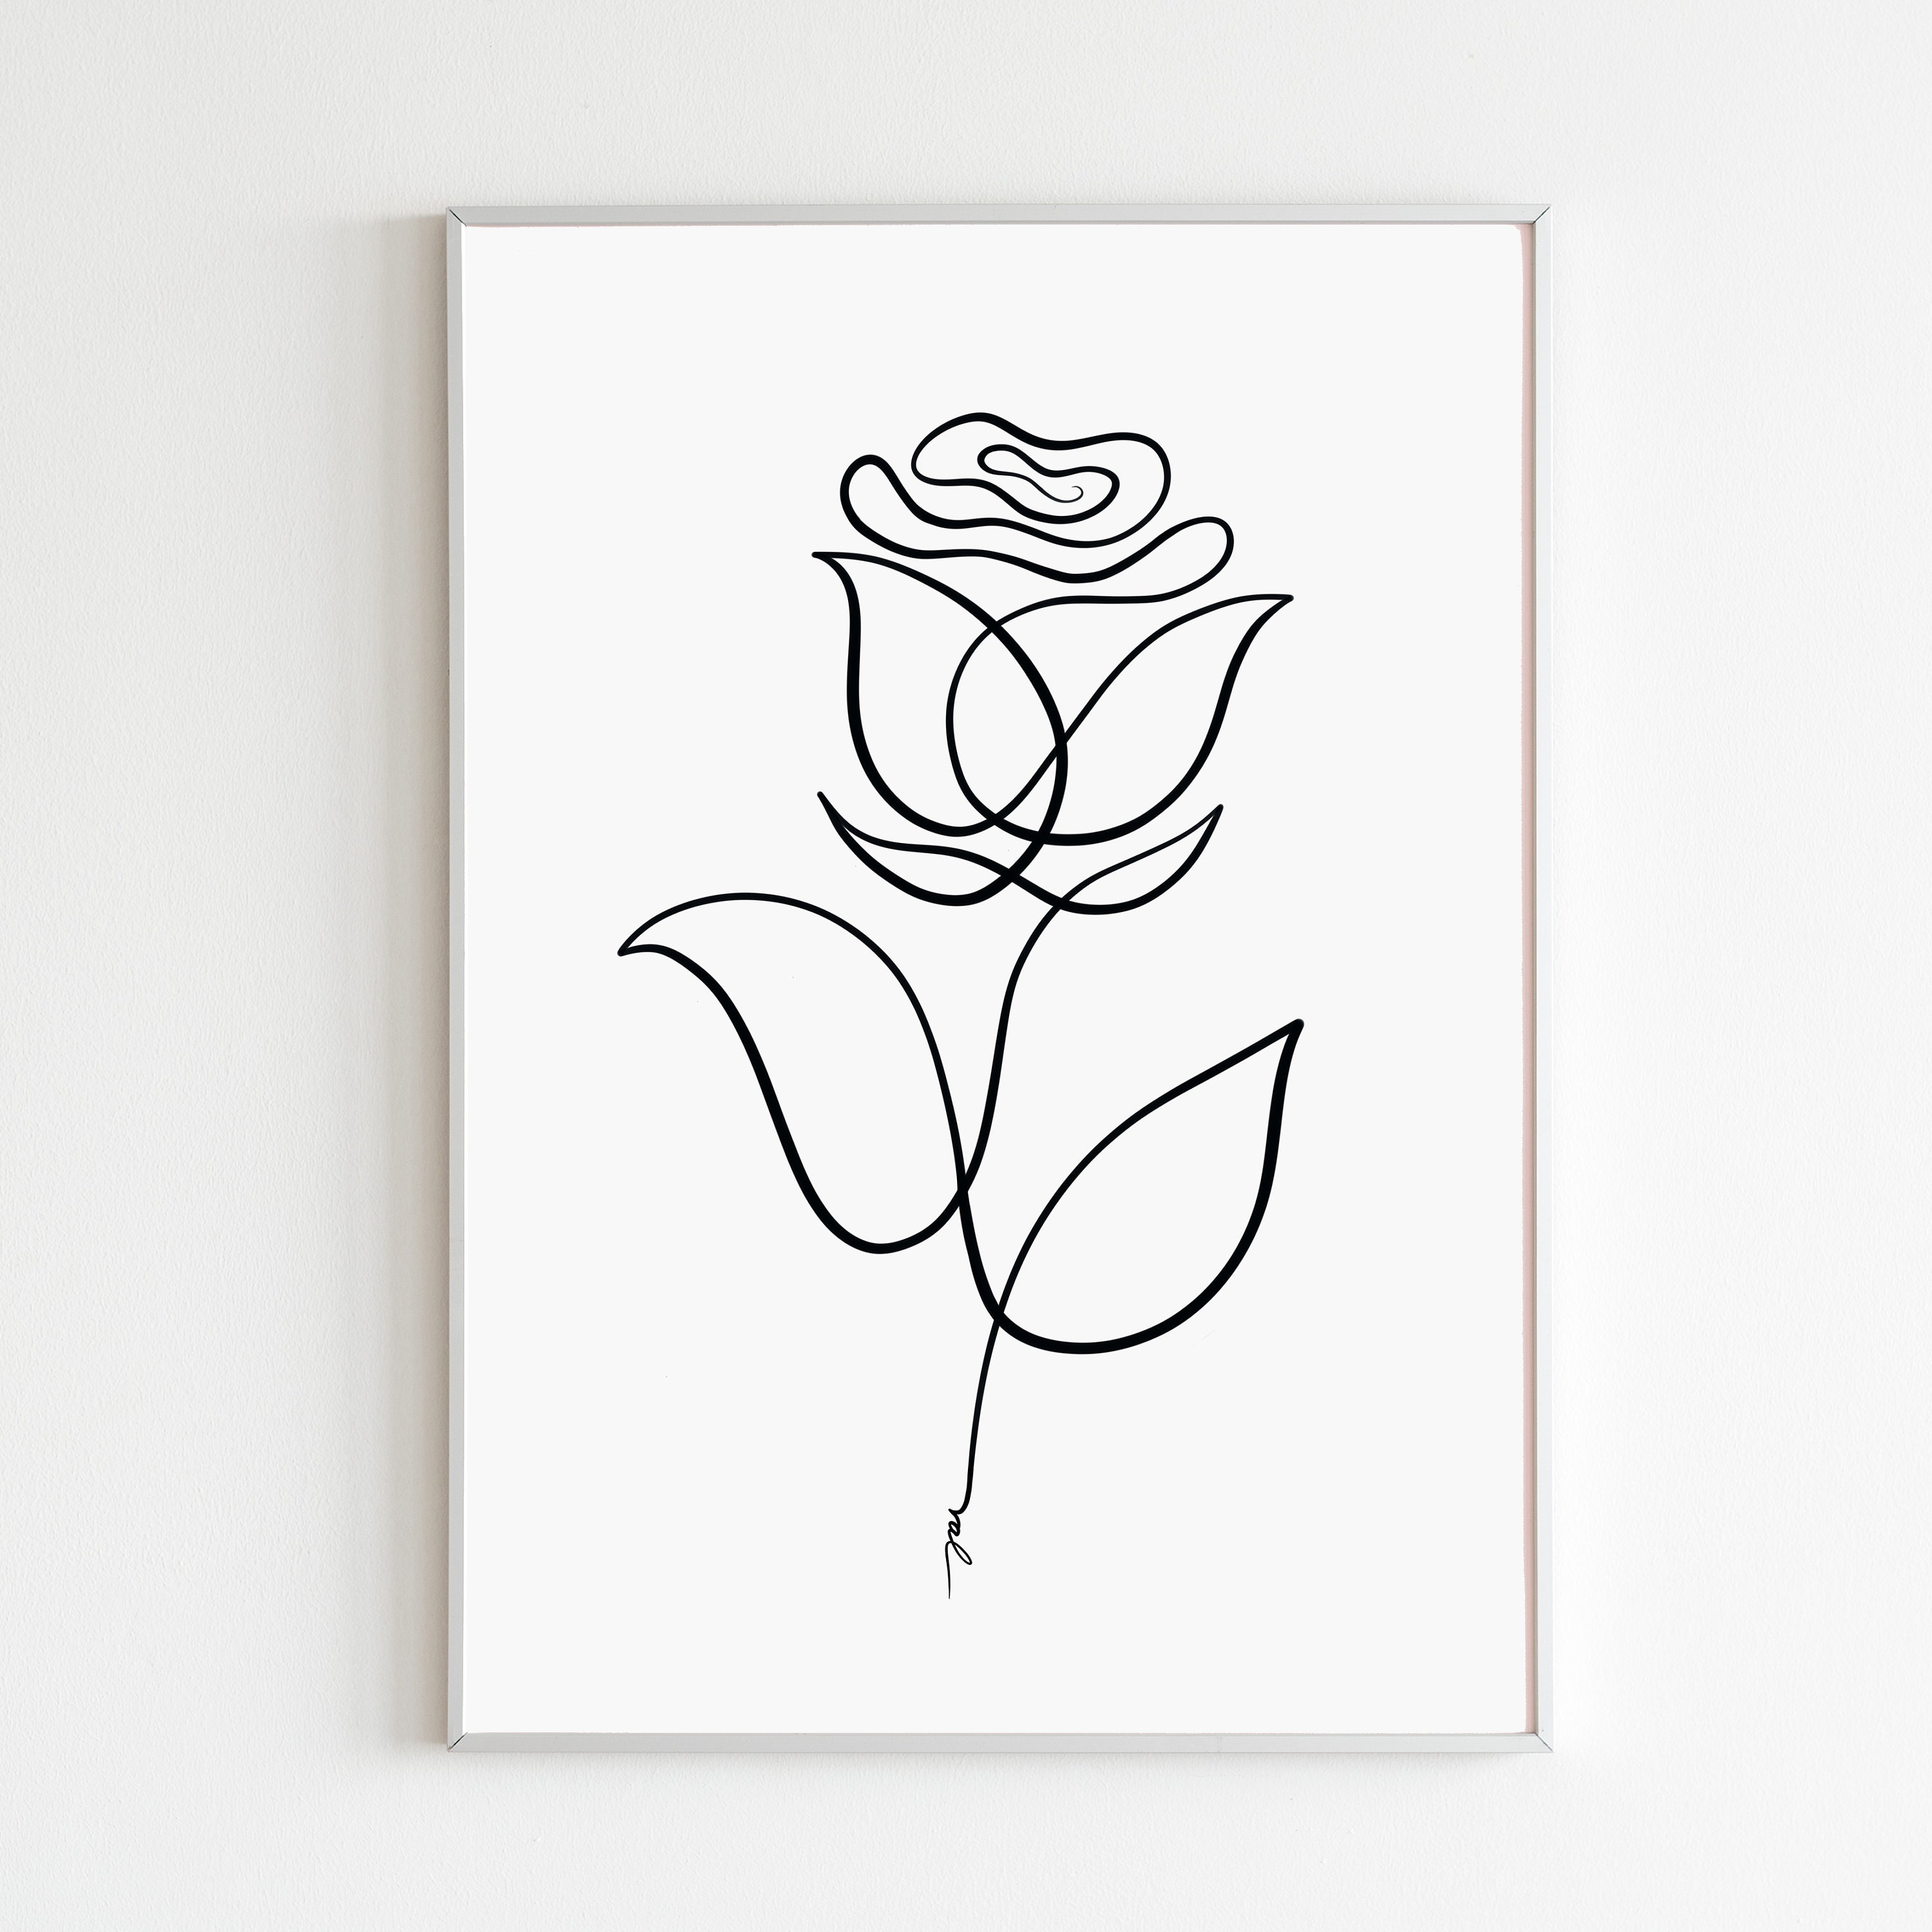 Illustration Of A Rose Line Art Logo Design High-Res Vector Graphic - Getty  Images